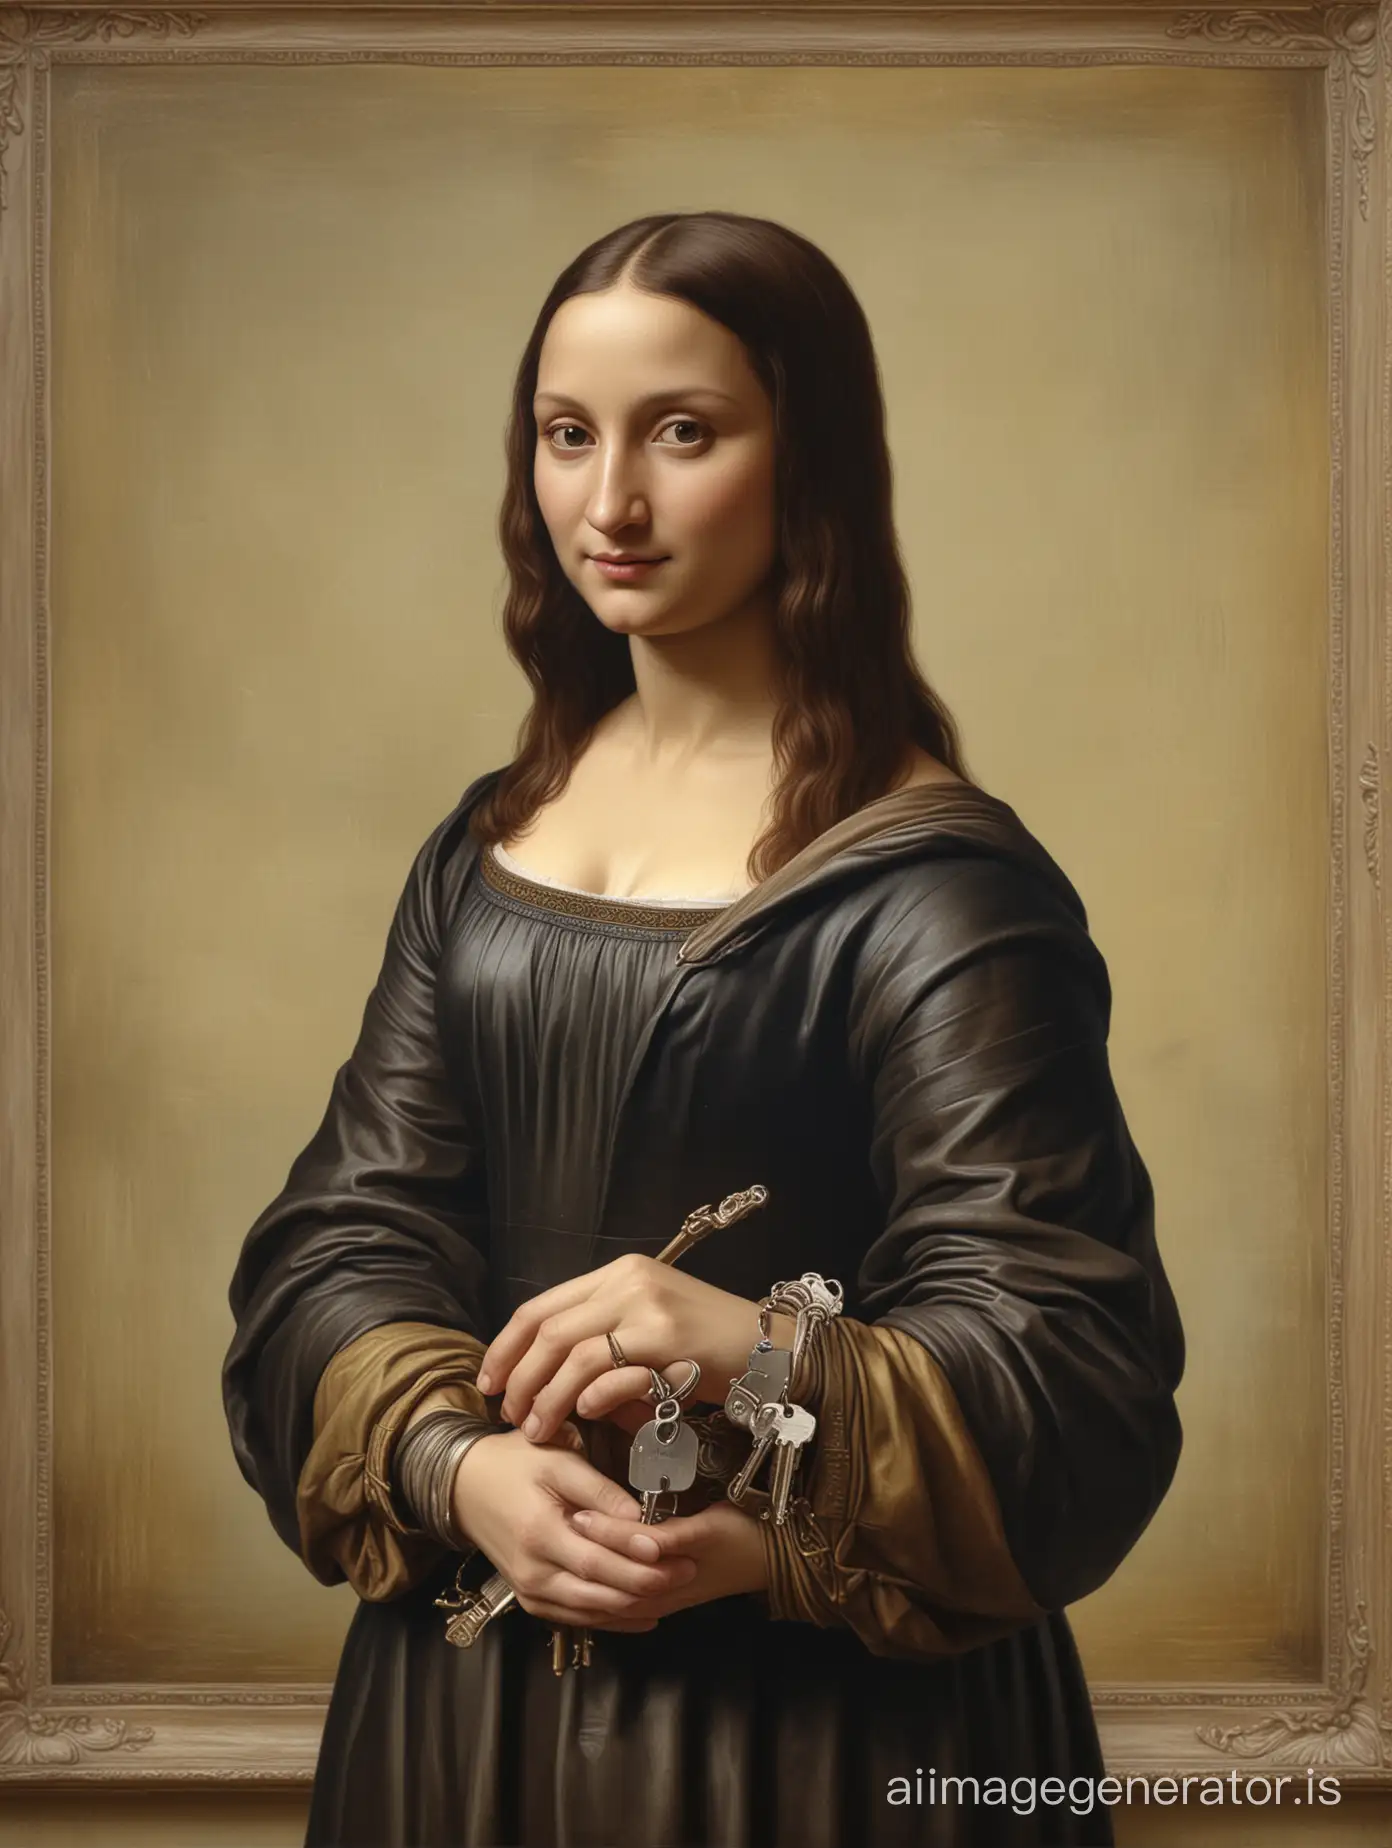 Mona Lisa holds the house keys in her hand and looks at the viewer, anatomically correct proportions, absence of artifacts, hyperrealism, 4K photo